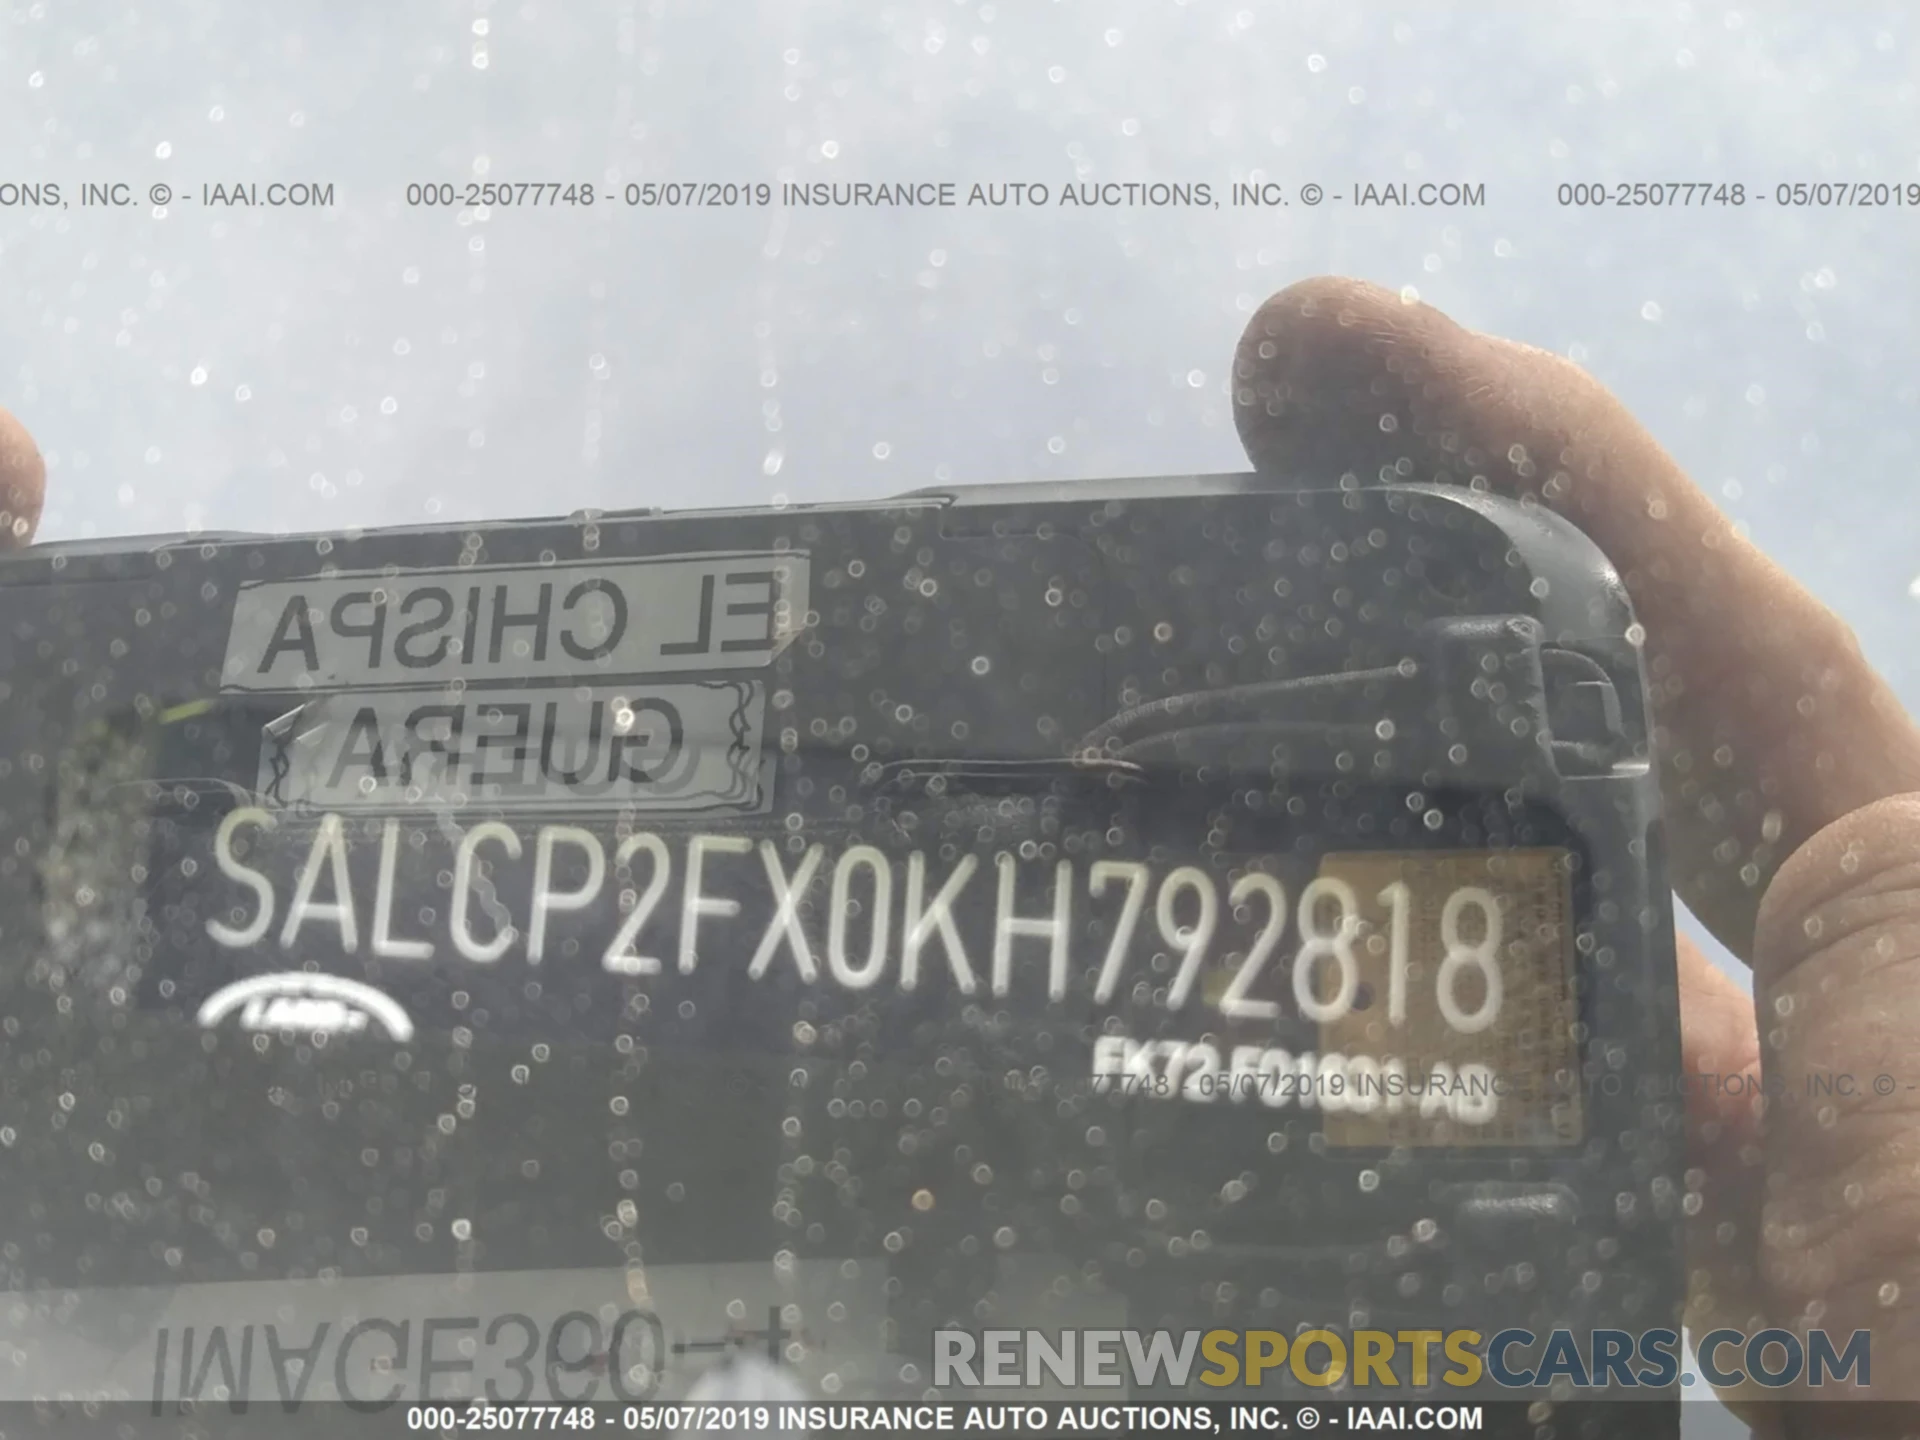 9 Photograph of a damaged car SALCP2FX0KH792818 LAND ROVER DISCOVERY SPORT 2019